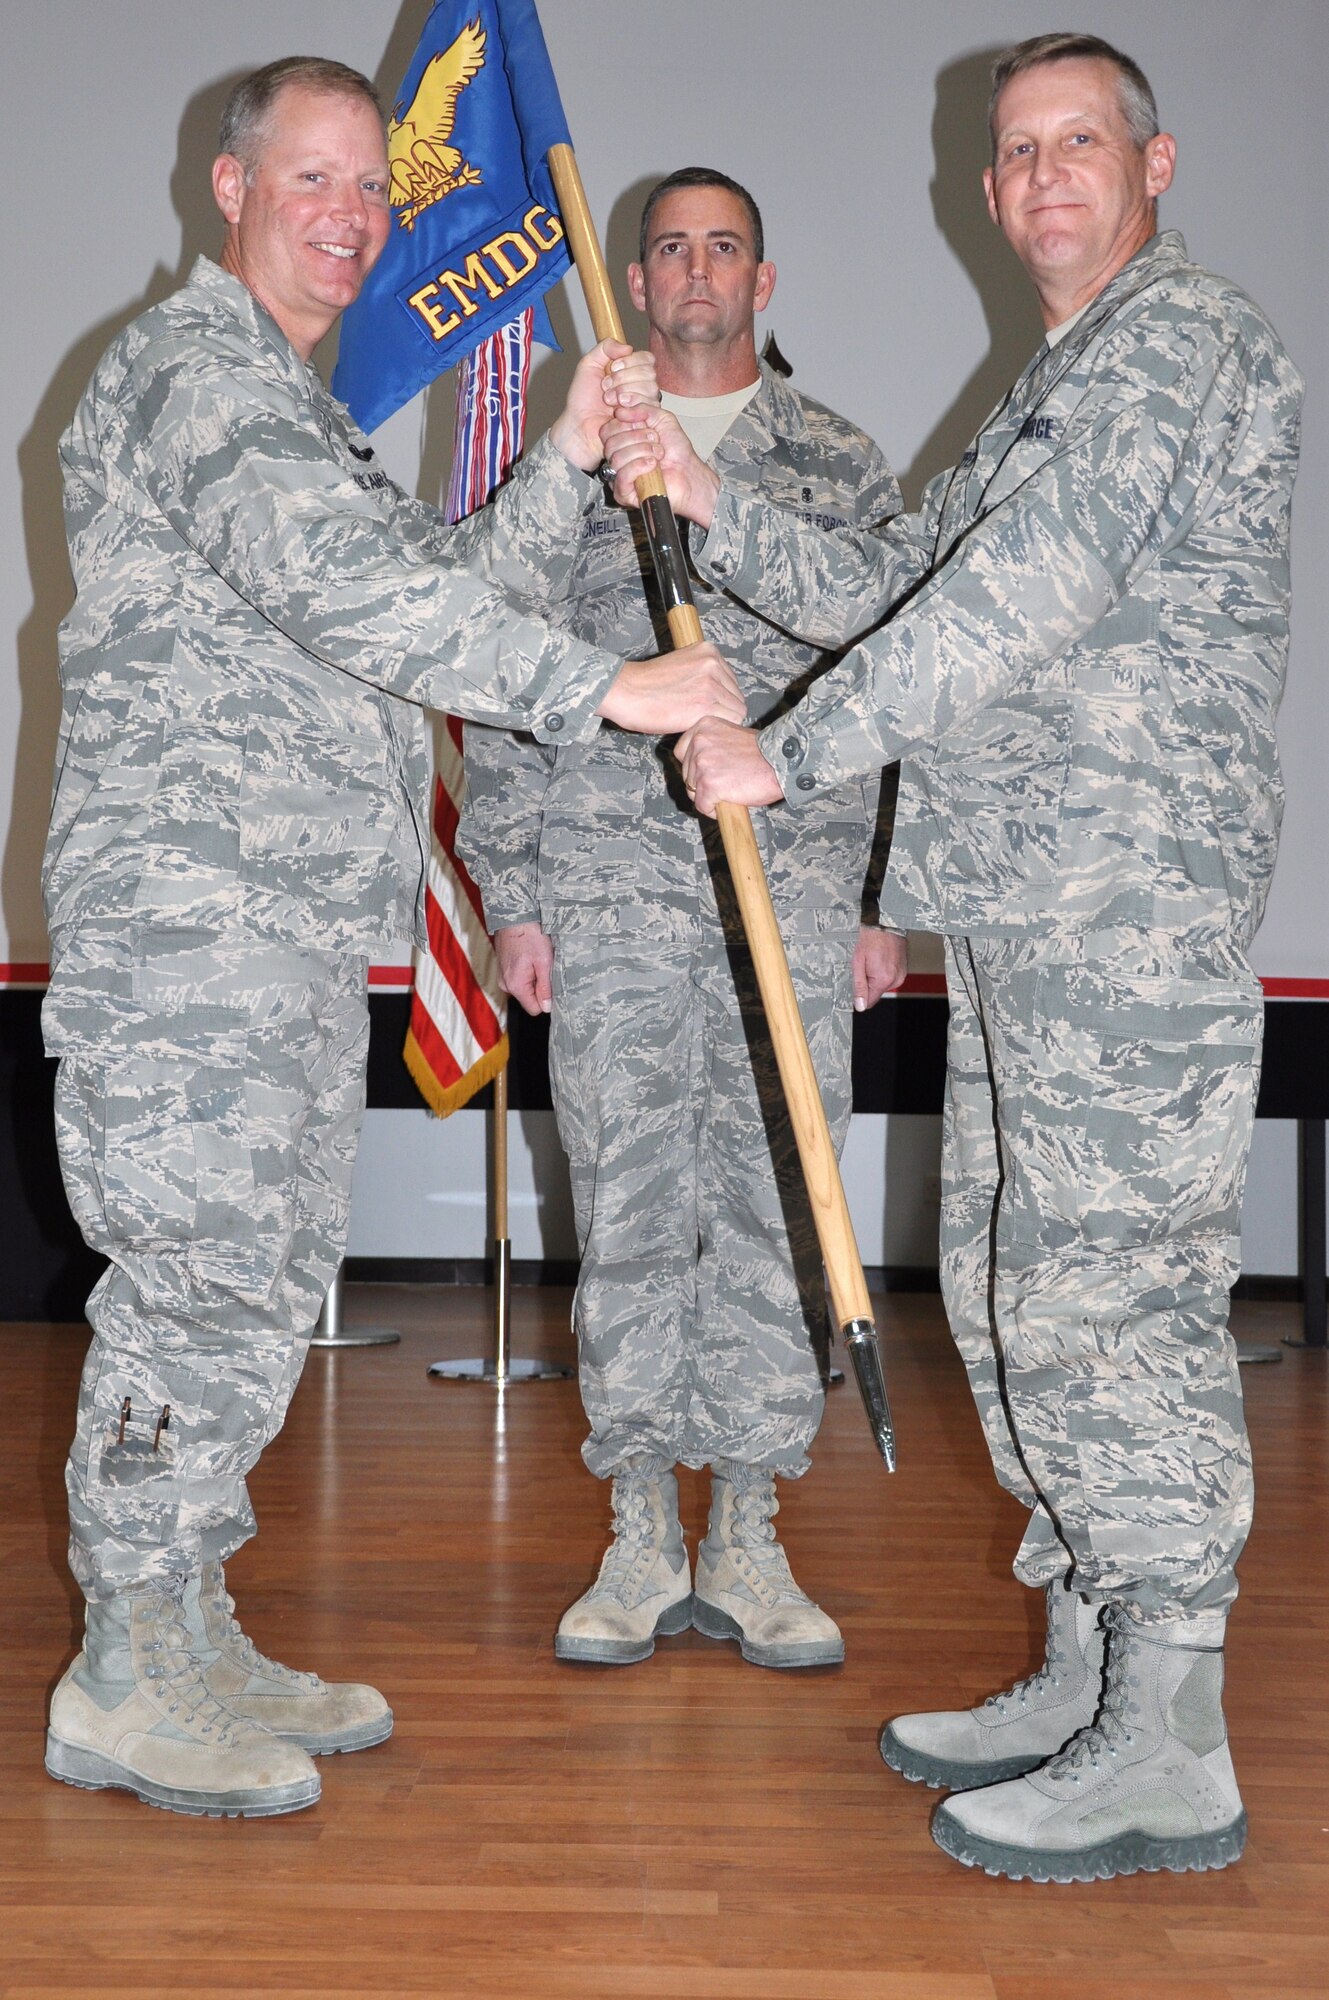 Col. Michael Zick, 386th Air Expeditionary Wing commander, left, passes the 386th Expeditionary Medical Group guide-on to Col. Mark Koppen during a change of command ceremony Dec 12 at an undisclosed location in Southwest Asia. Colonel Koppen assumed command of the 386th MDG from Col. Craig Rice. (U.S. Air Force photo by Senior Airman Rachelle Elsea)
